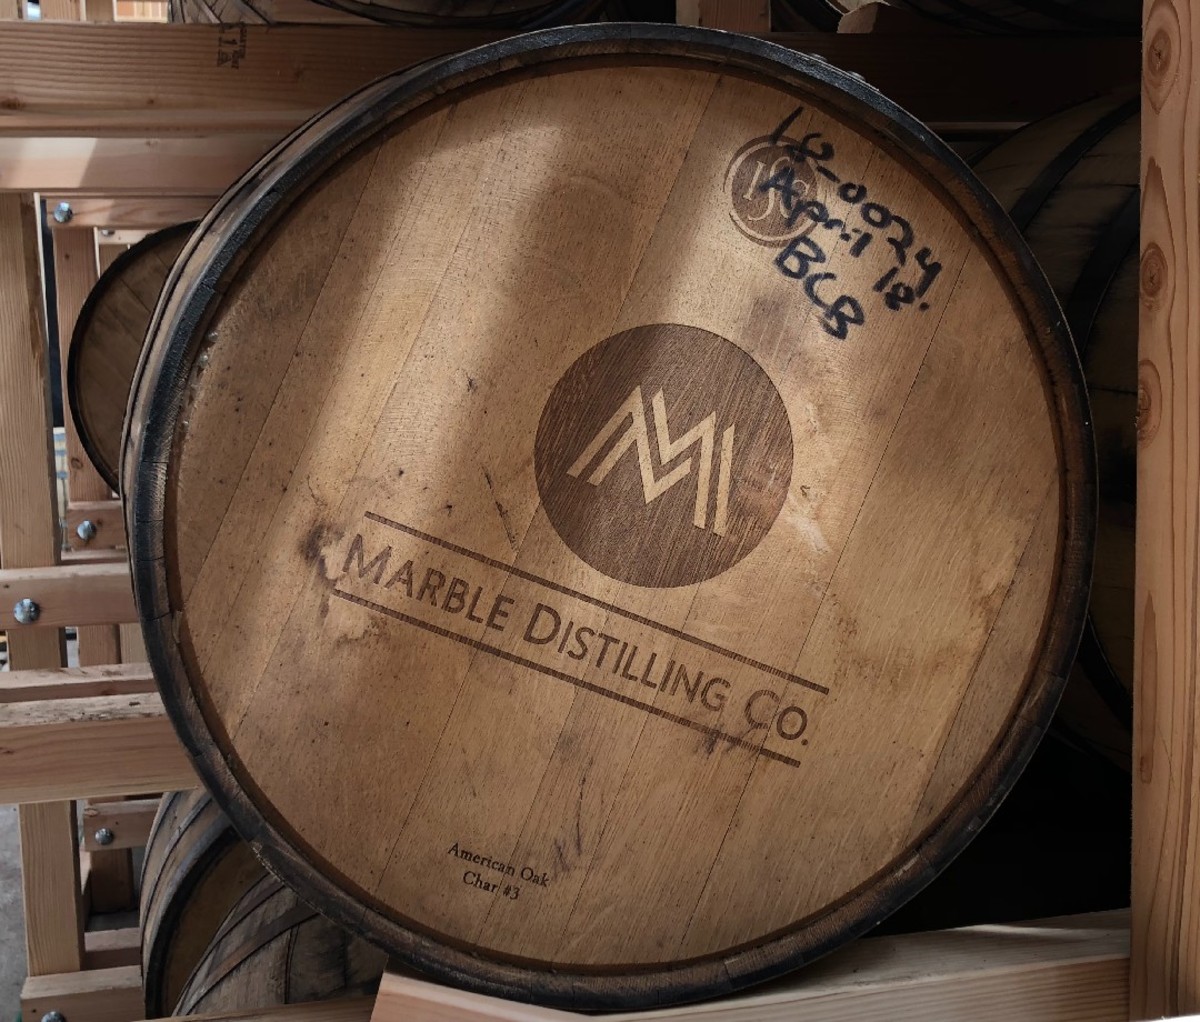 A top-view of a cask with the Marble Distilling Co. logo on it.